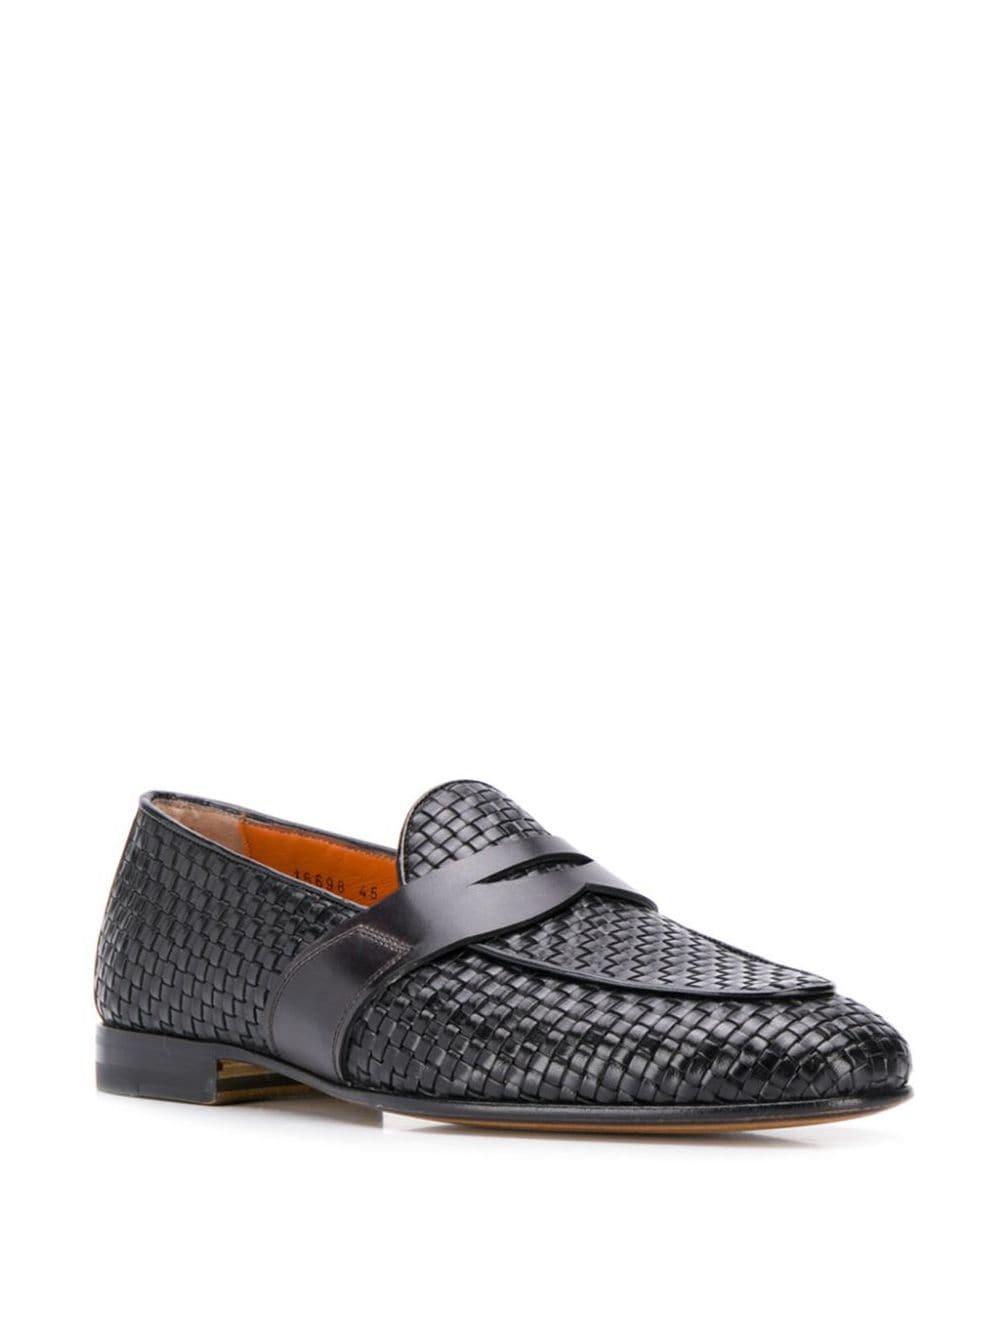 Santoni Leather Woven Loafers in Black for Men - Lyst